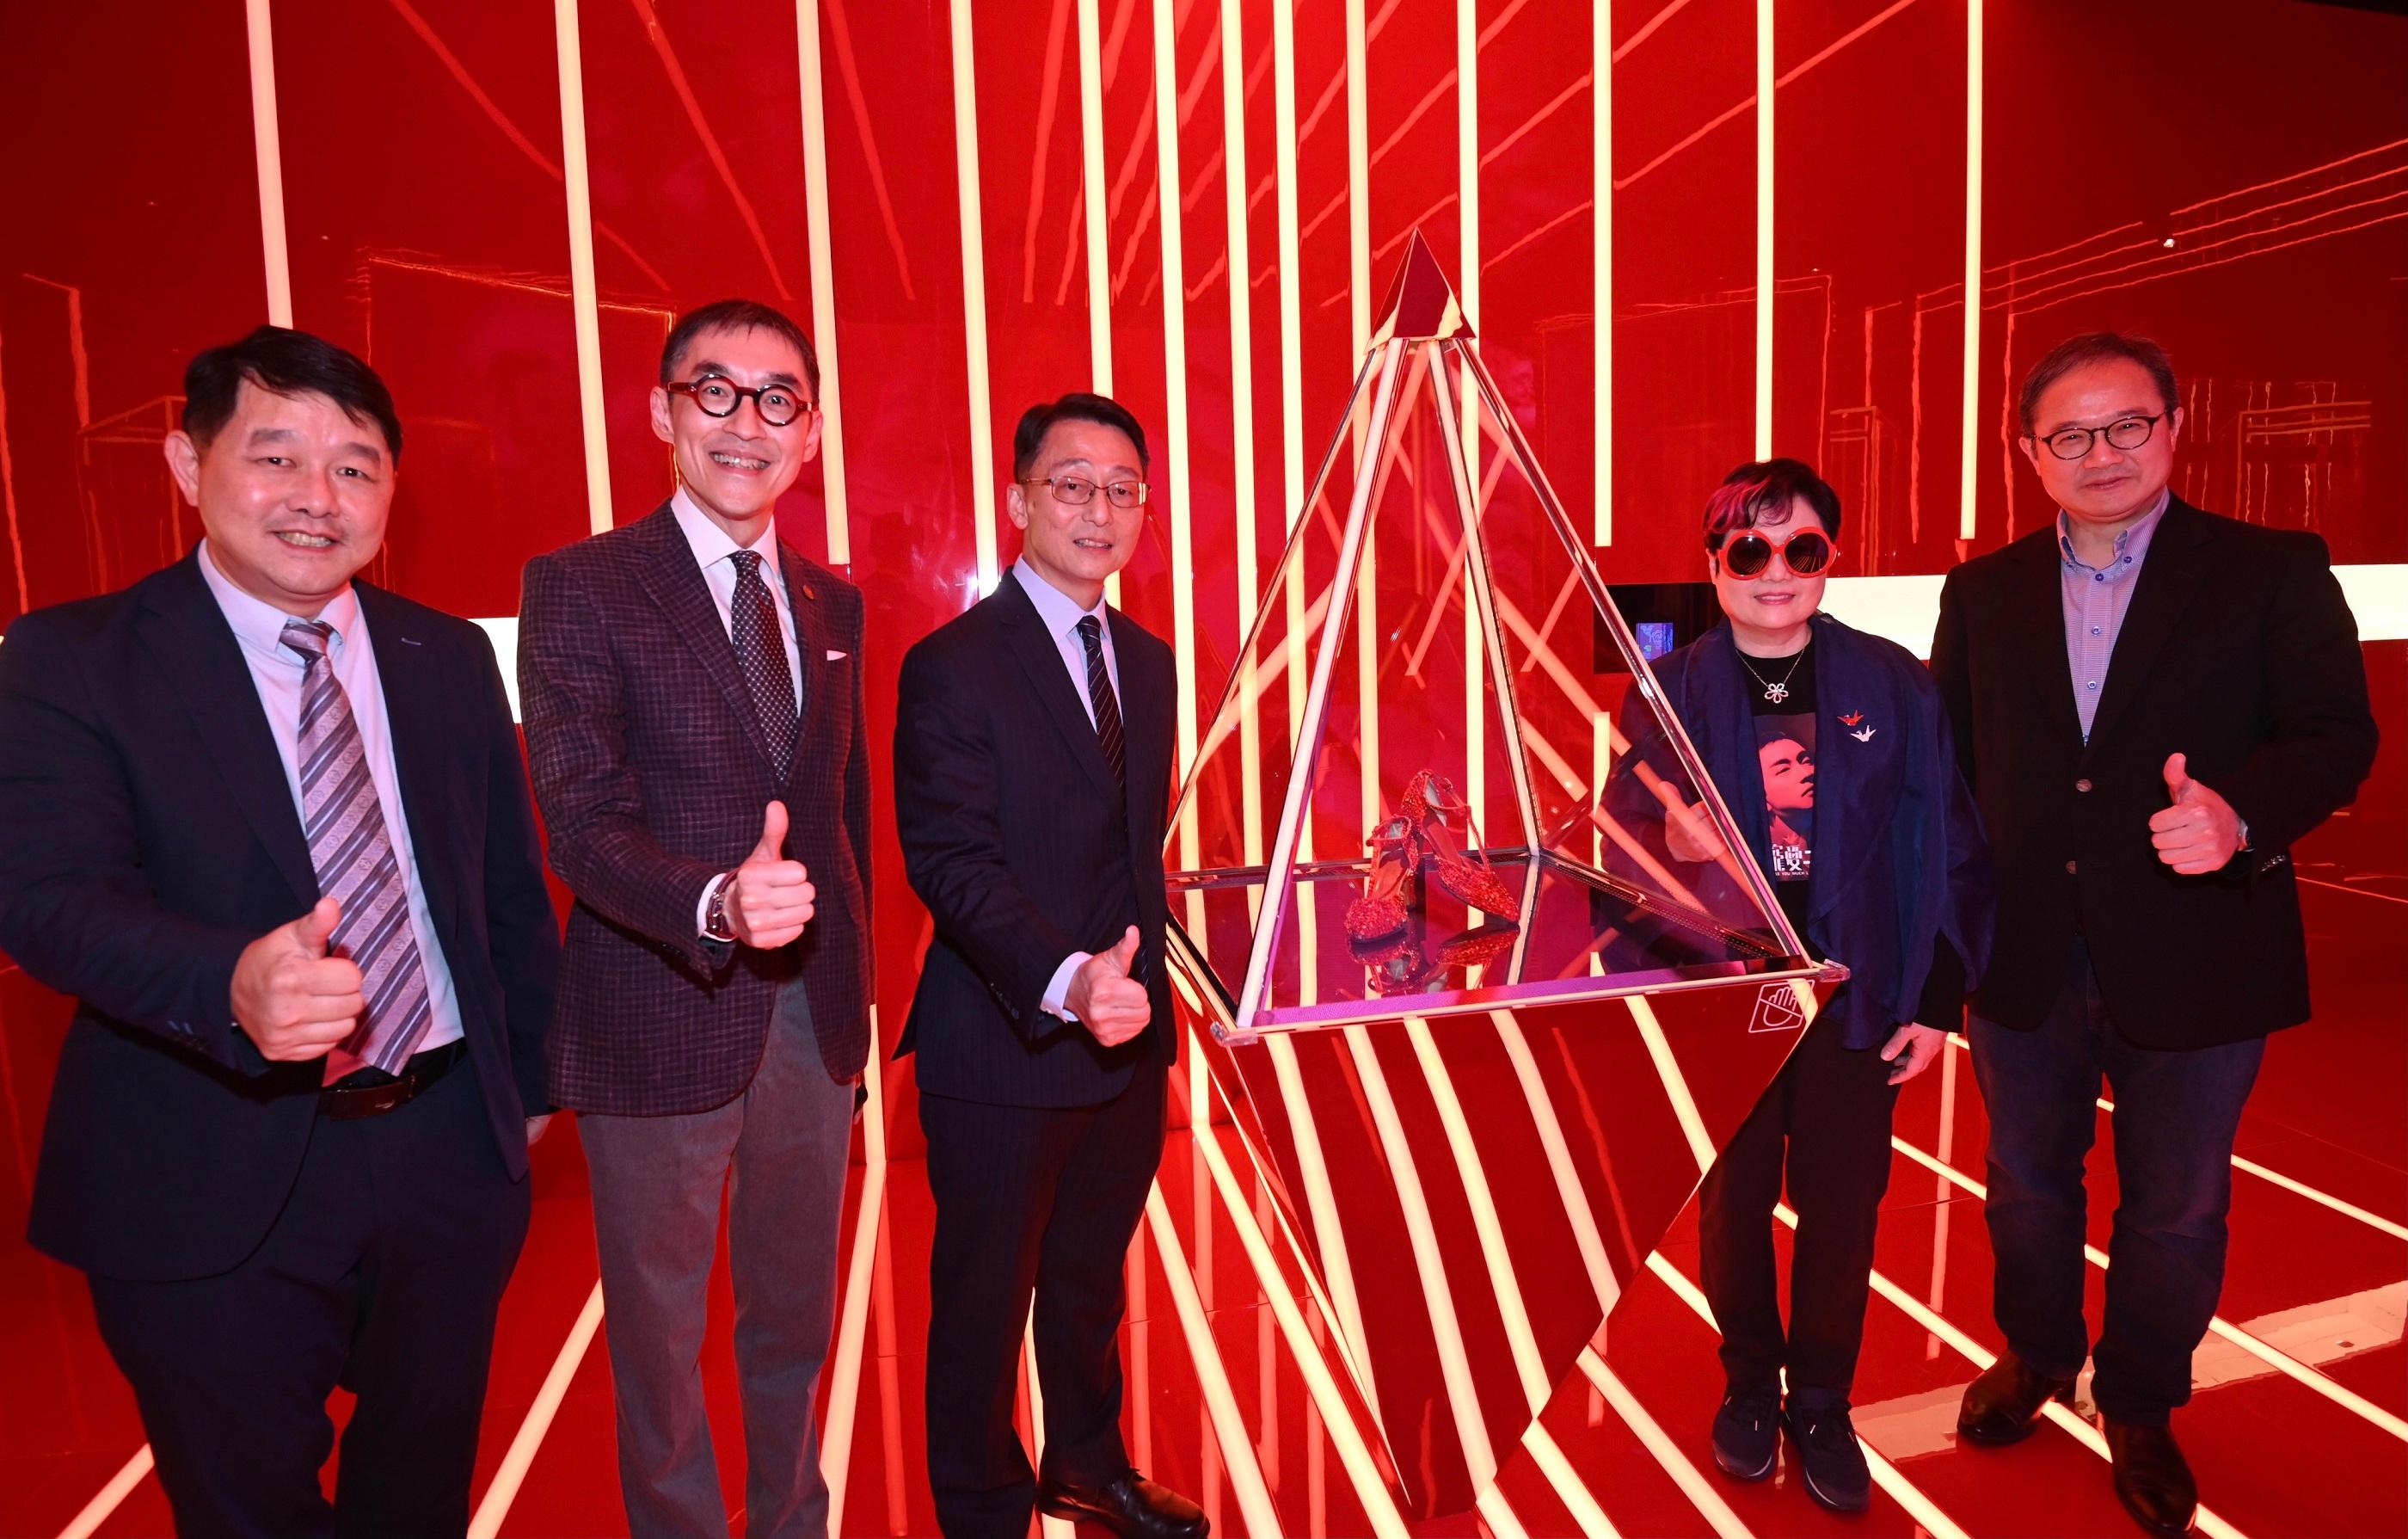 The opening ceremony for the "Miss You Much Leslie Exhibition" was held today (March 28) at the Hong Kong Heritage Museum. Photo shows (from left) the Museum Director of the Hong Kong Heritage Museum, Mr Brian Lam; the Chairman of the Museum Advisory Committee, Mr Douglas So; the Director of Leisure and Cultural Services, Mr Vincent Liu; guest curators Ms Florence Chan; and the Permanent Secretary for Culture, Sports and Tourism, Mr Joe Wong, touring the exhibition.
